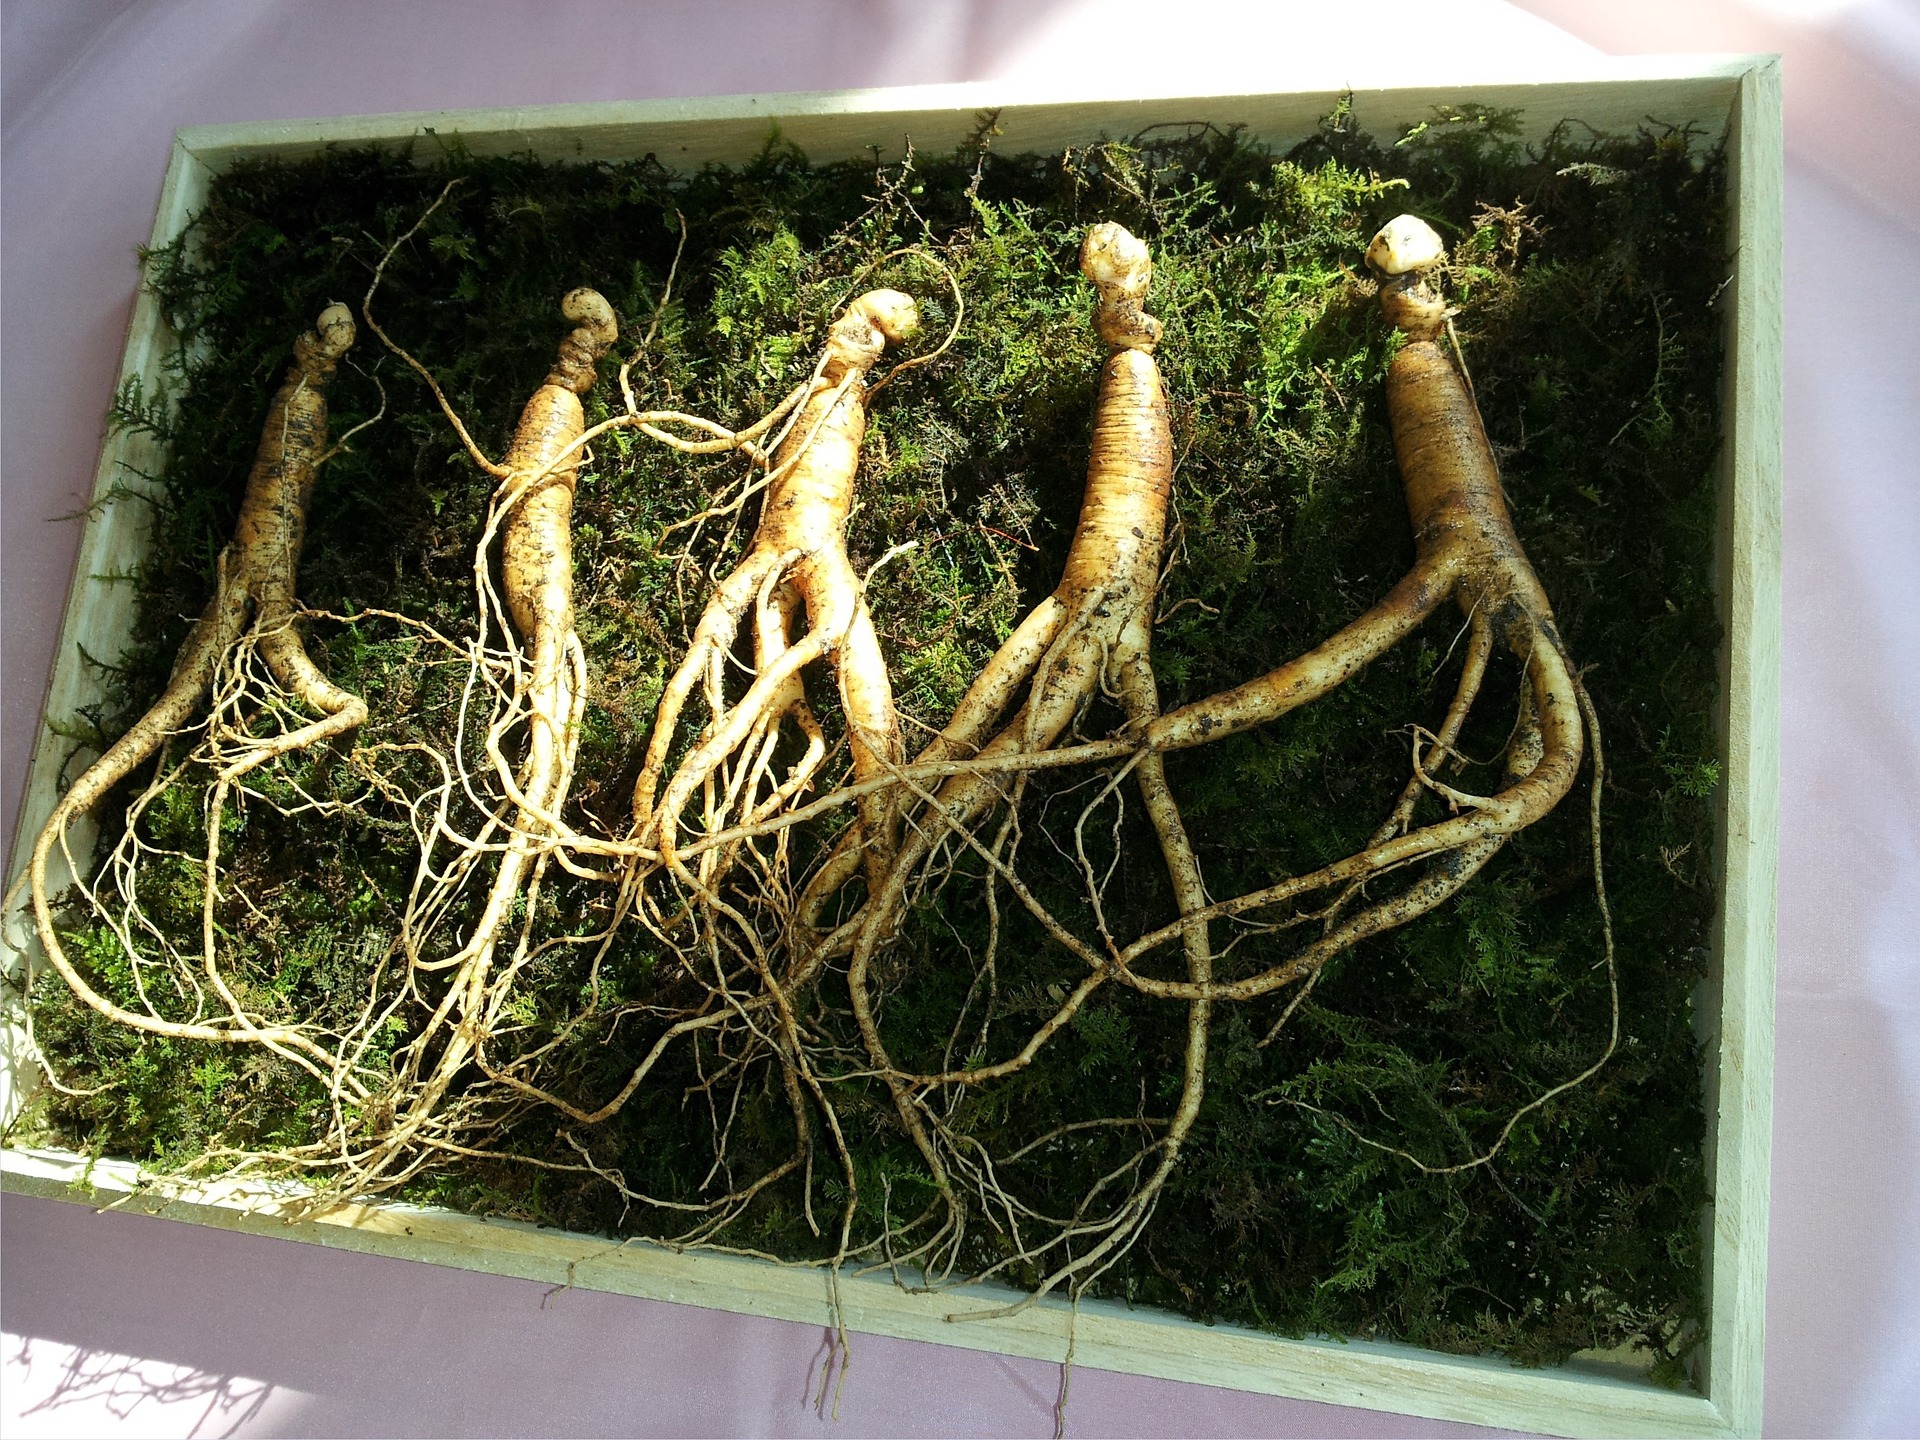 Photo of ginseng root